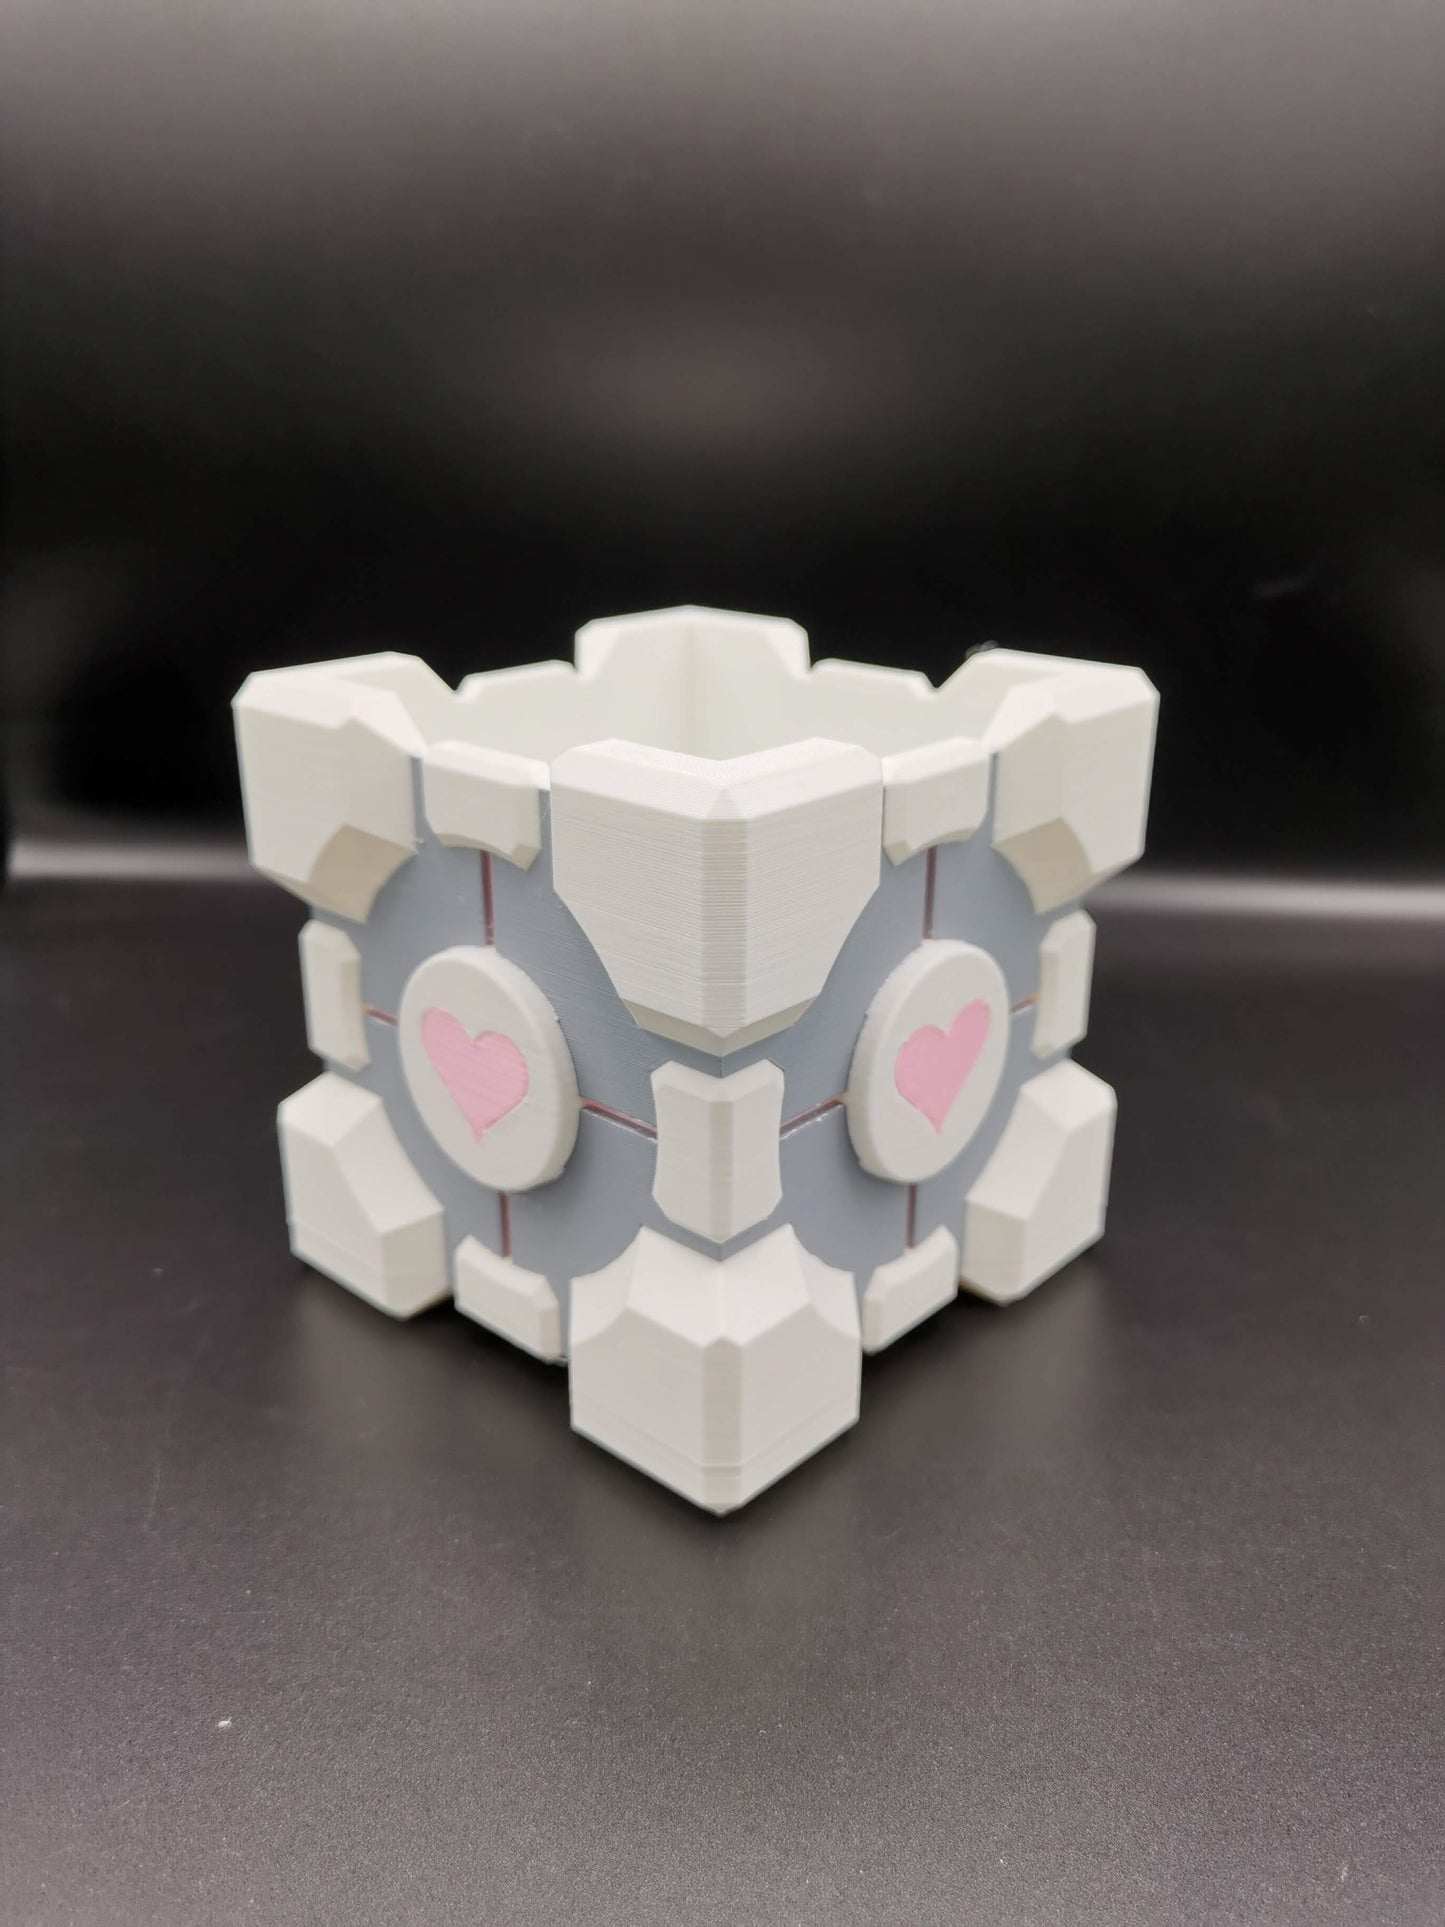 Companion Cube Portal planter from front angle close up without plant